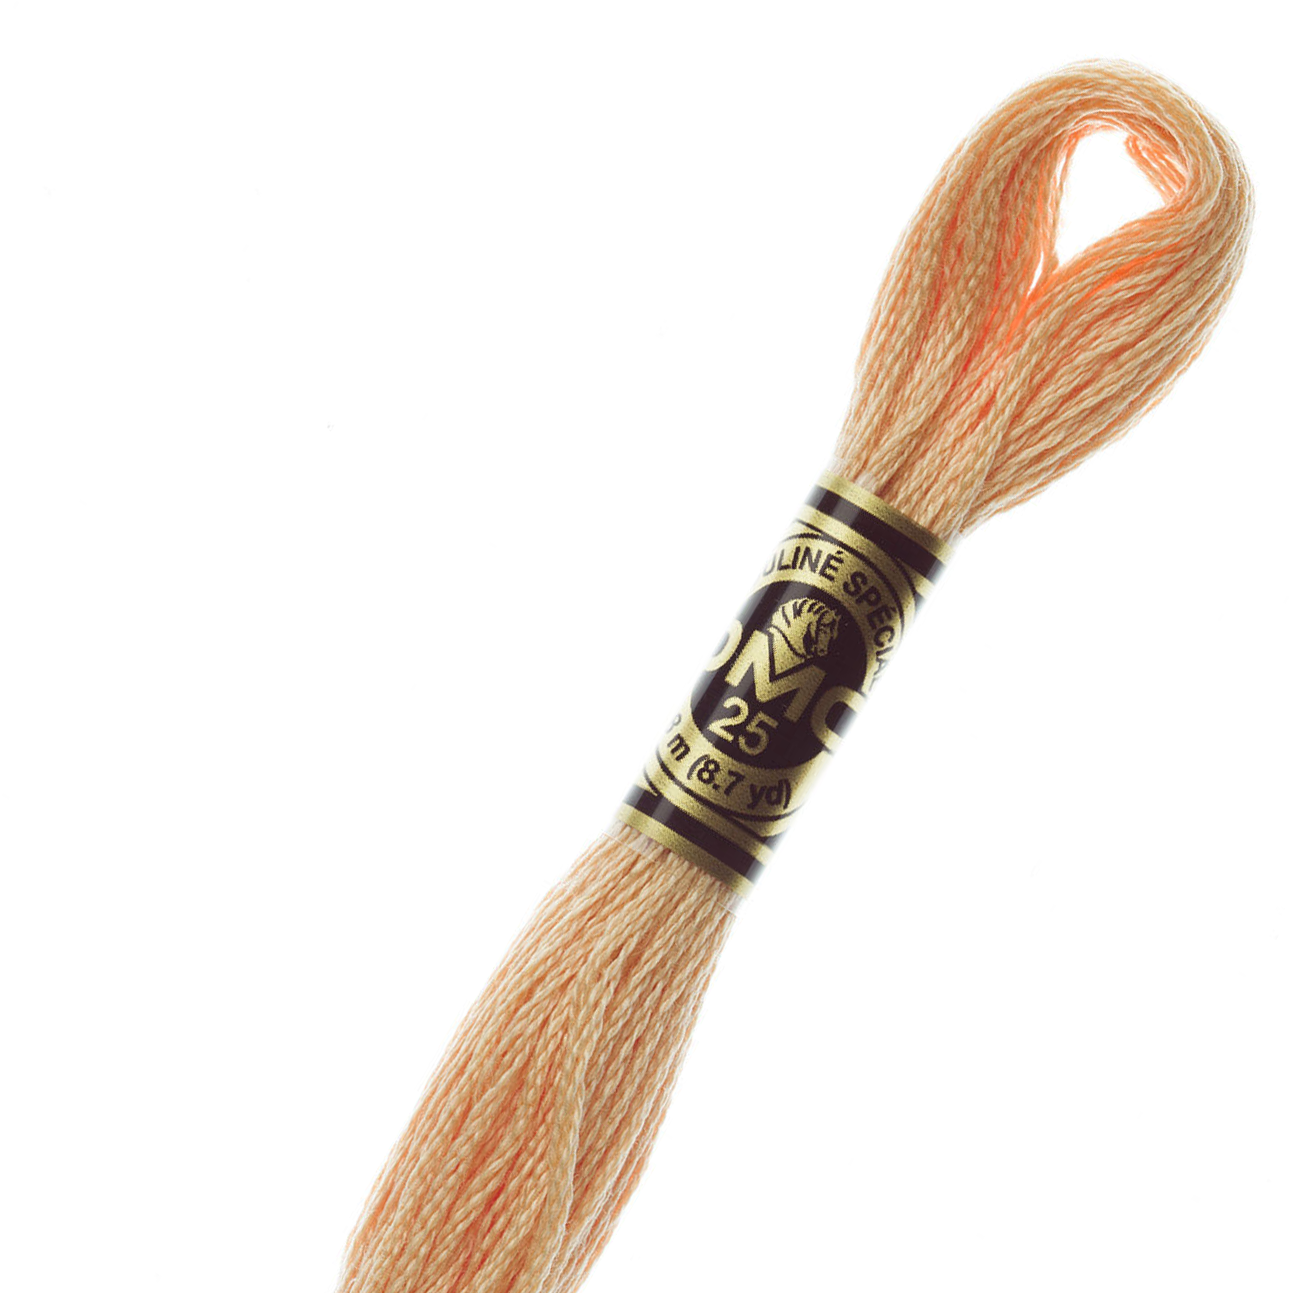 DMC 3856 Mahogany Ultra Very Light Embroidery Floss 6 Strand Thread for  Embroidery Cross Stitch Needlepoint Sewing Beading 2 Skeins